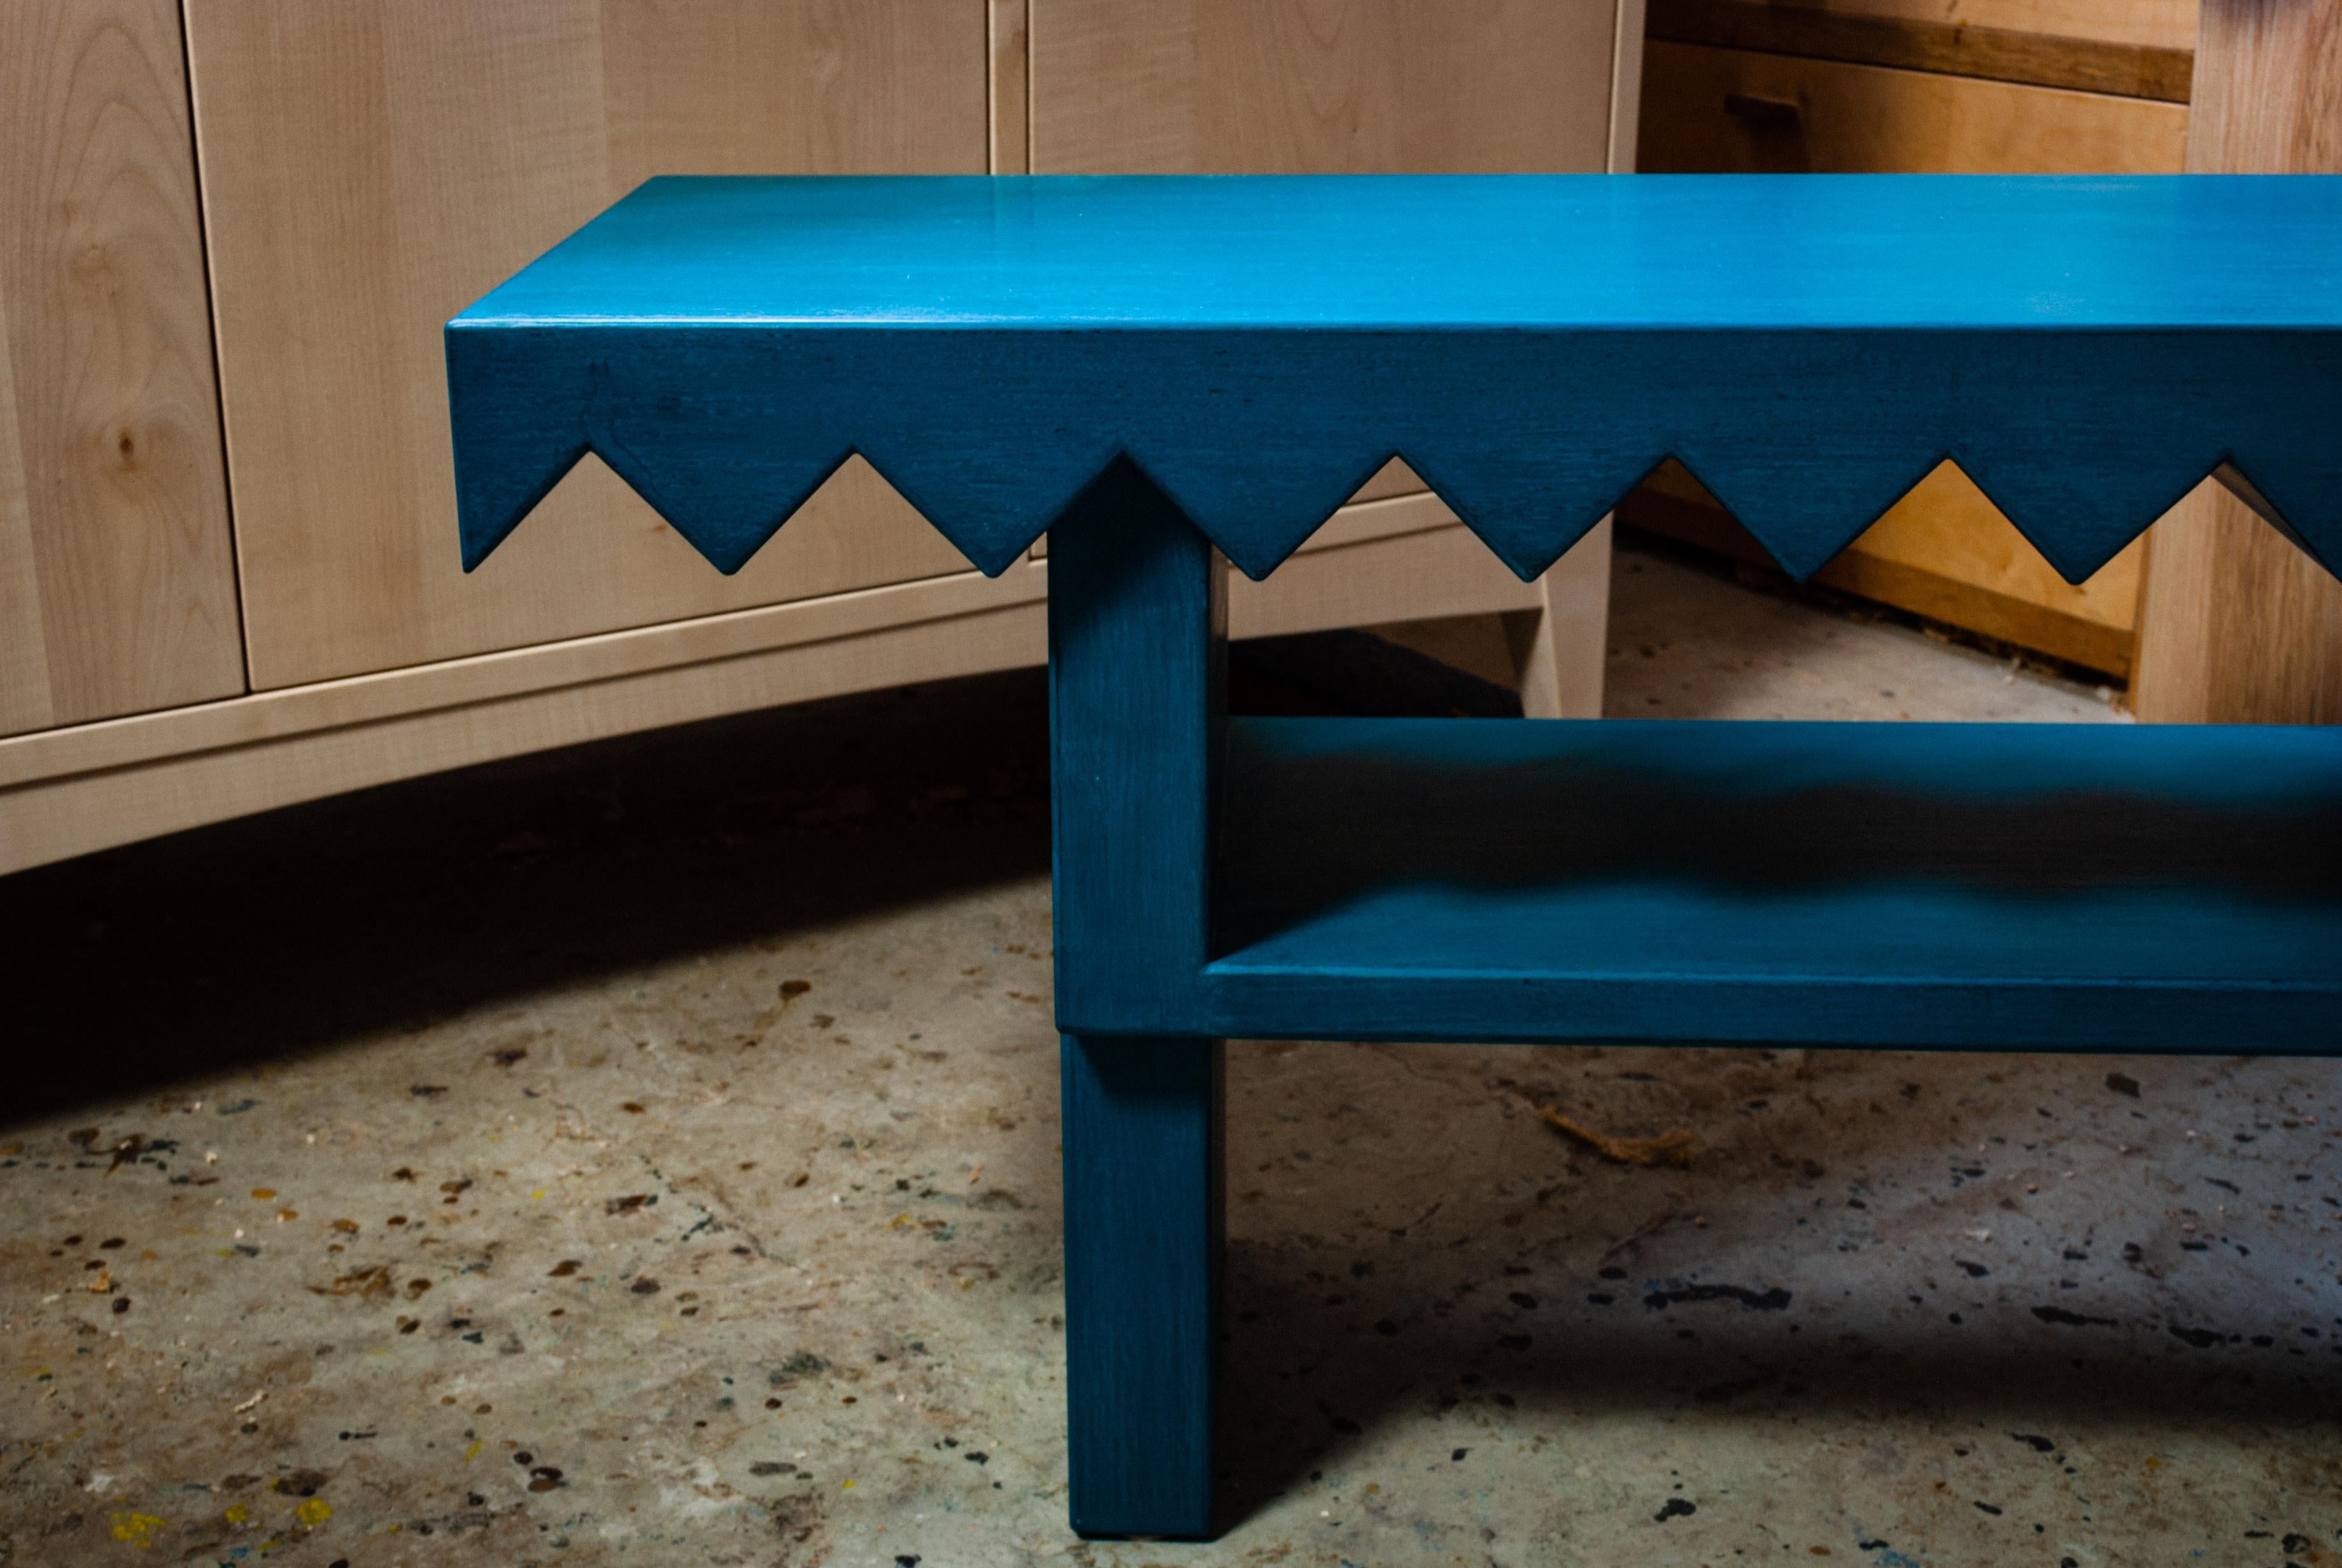 Solid English Oak bench with a simple, elegant and robust design.
Seats two people.
The solid seat has a playful sawtooth relief cut into it, and features precisely hand cut, wedged mortise and tenon joints. 

The bench is painted in a teal milk